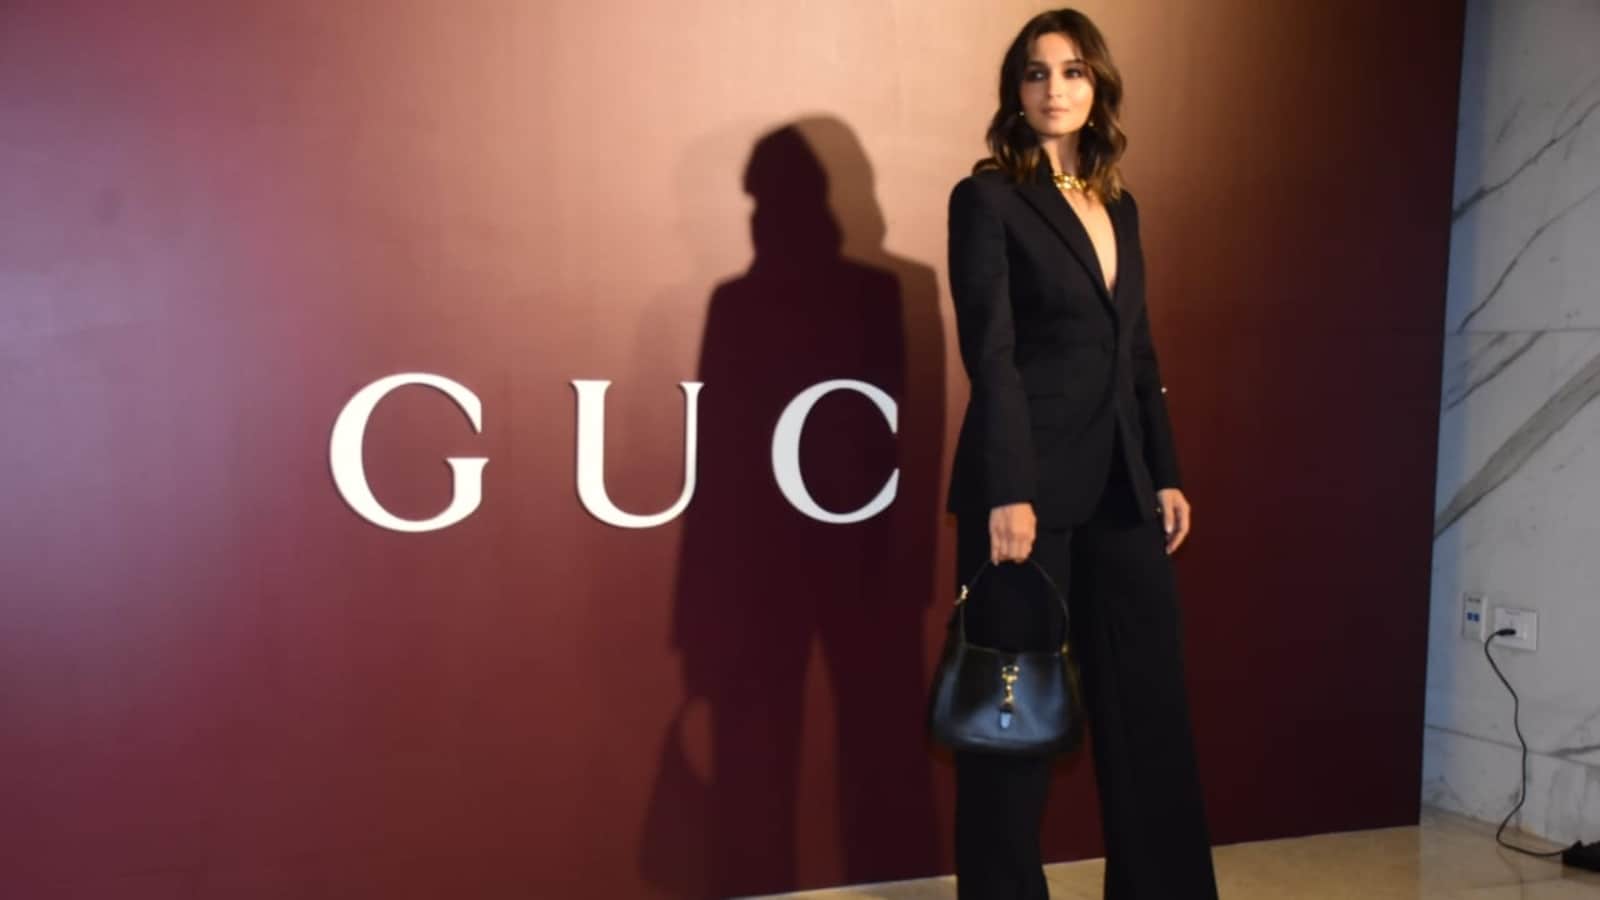 Reddit calls Alia Bhatt a ‘hypocrite’ for carrying leather bag at Gucci event after backing Poacher